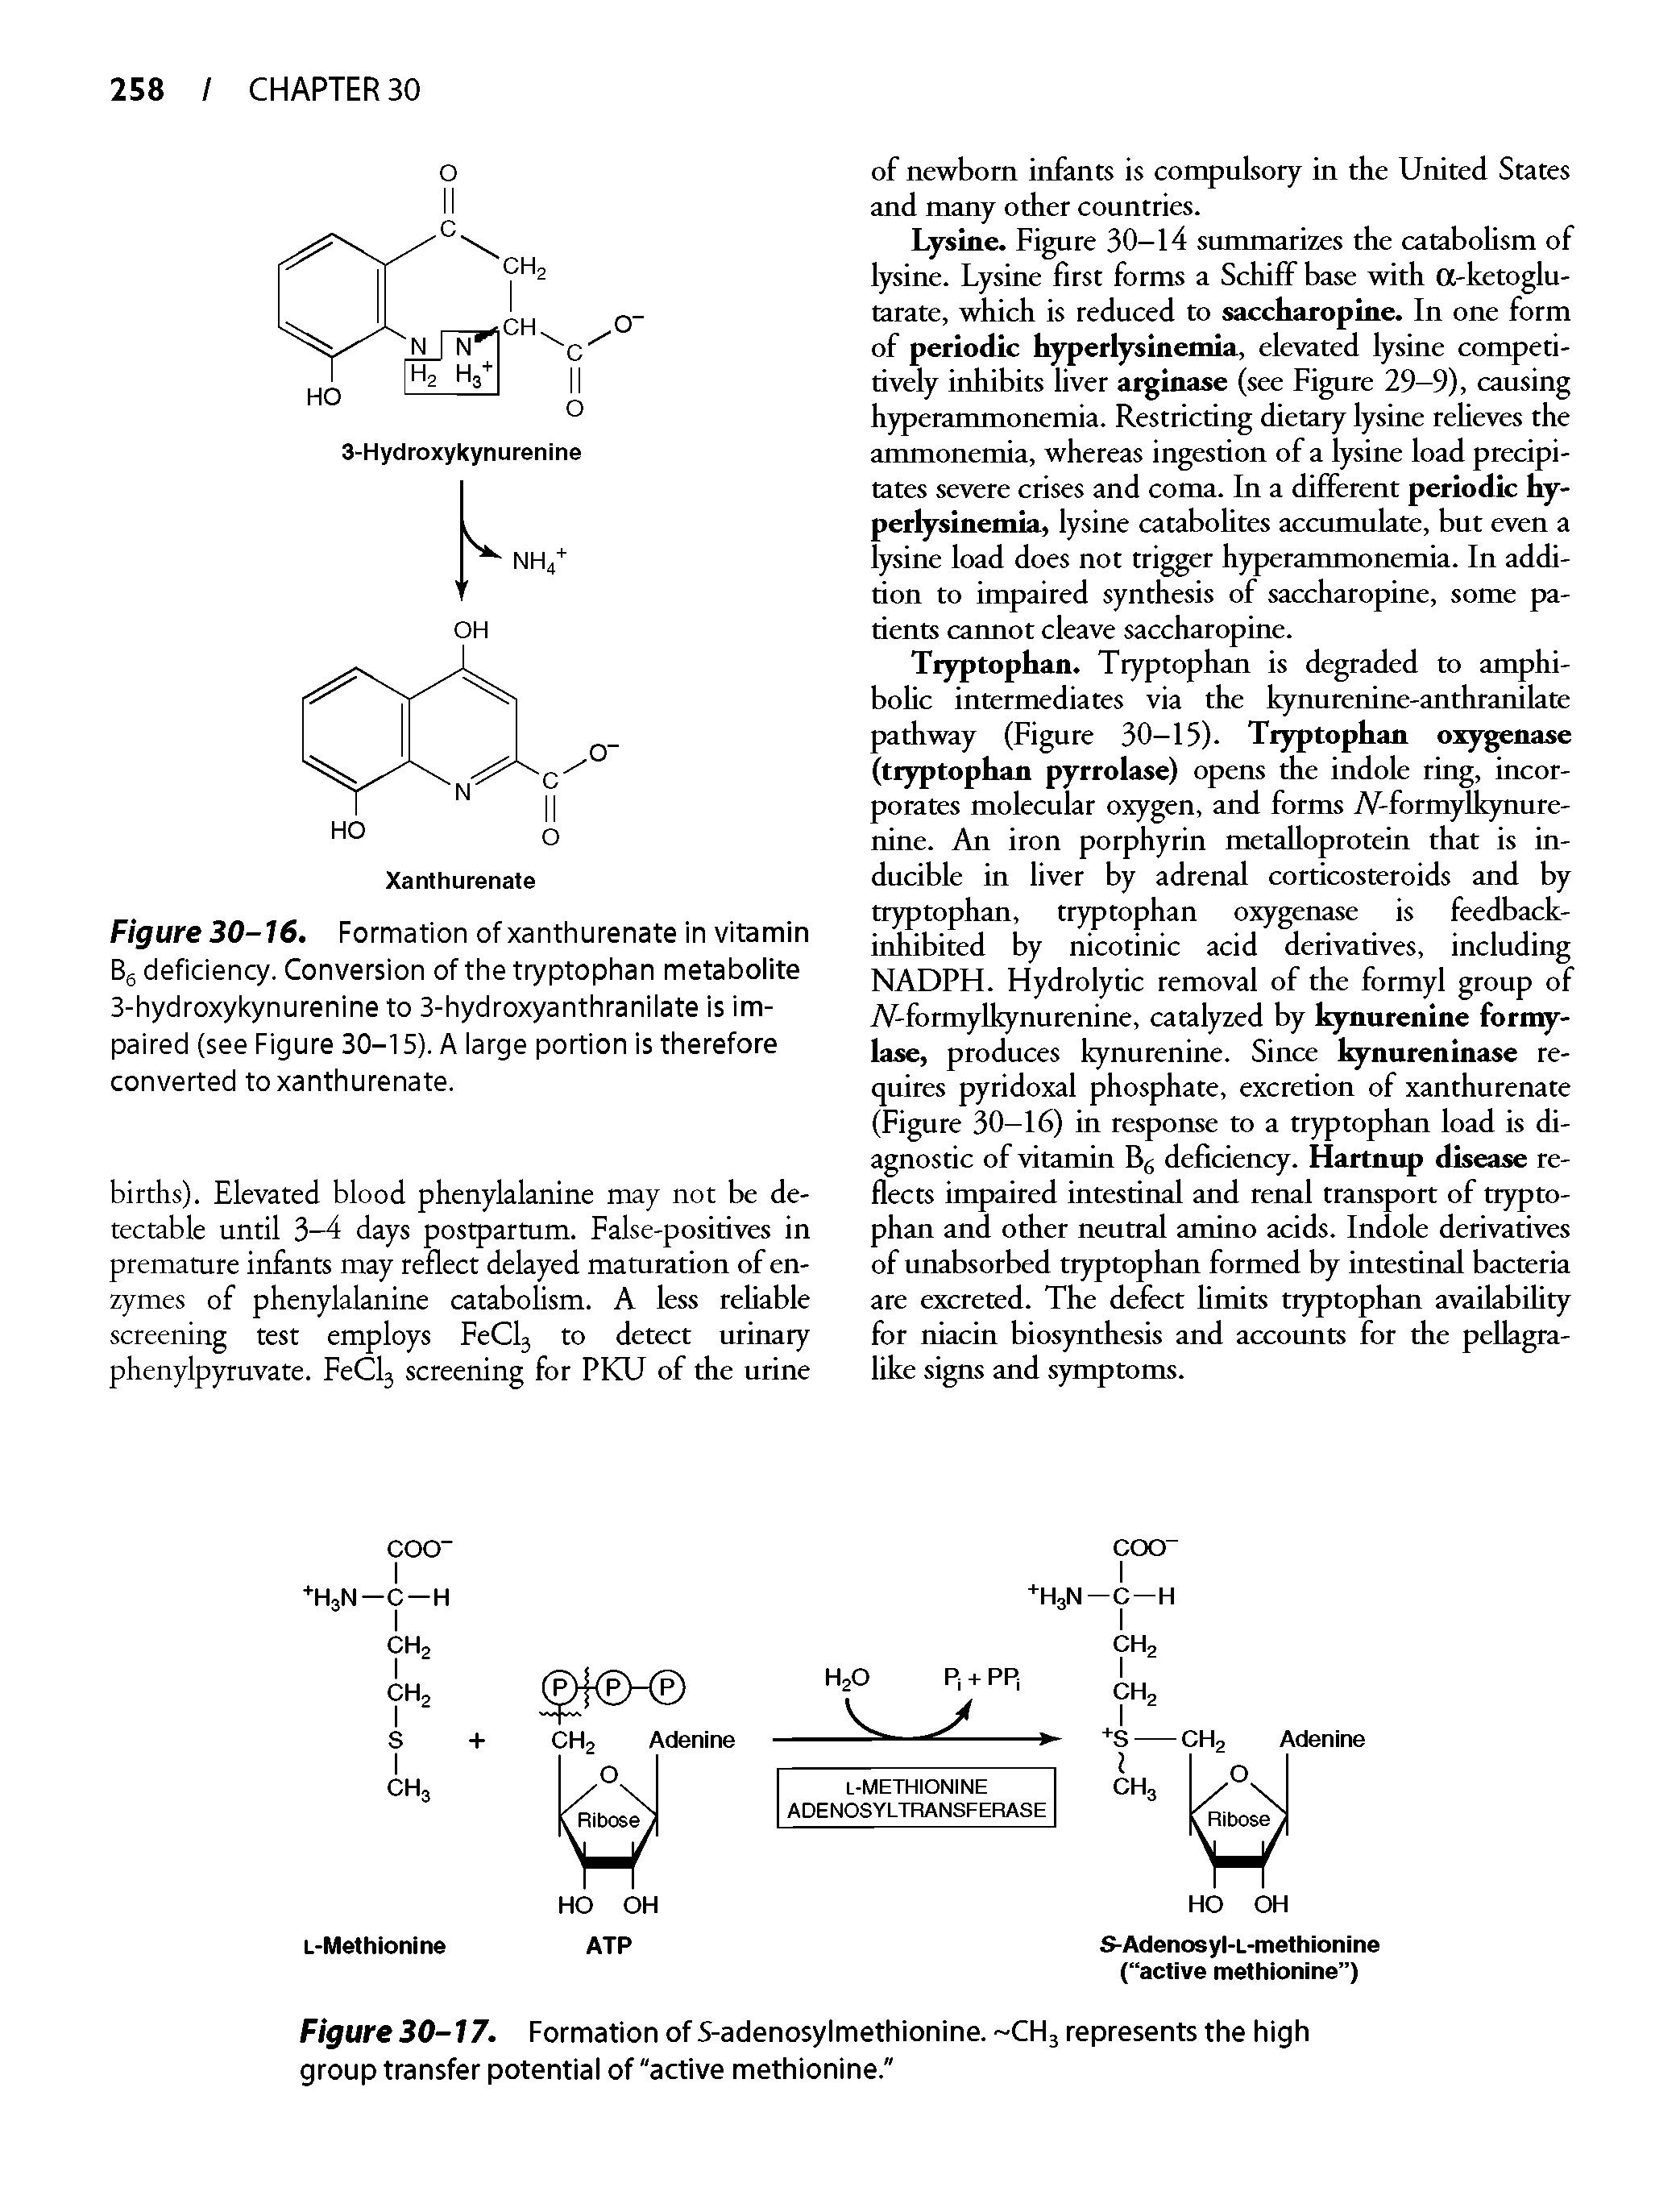 Figure 30-17. Formation of S-adenosylmethionine. -CHj represents the high group transfer potential of "active methionine."...